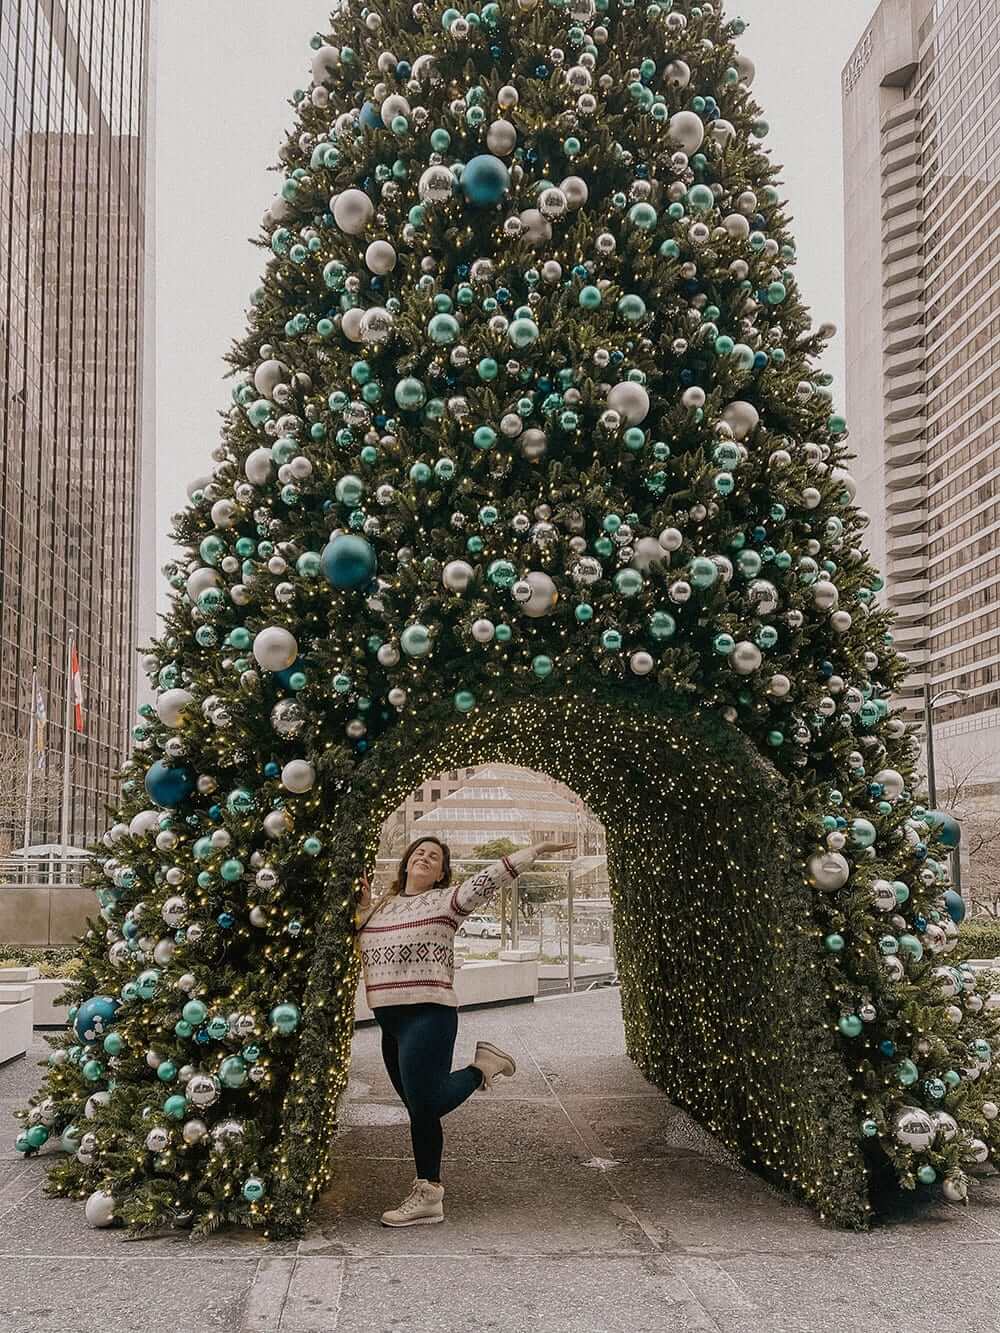 Instagrammable Holiday Photos in Vancouver